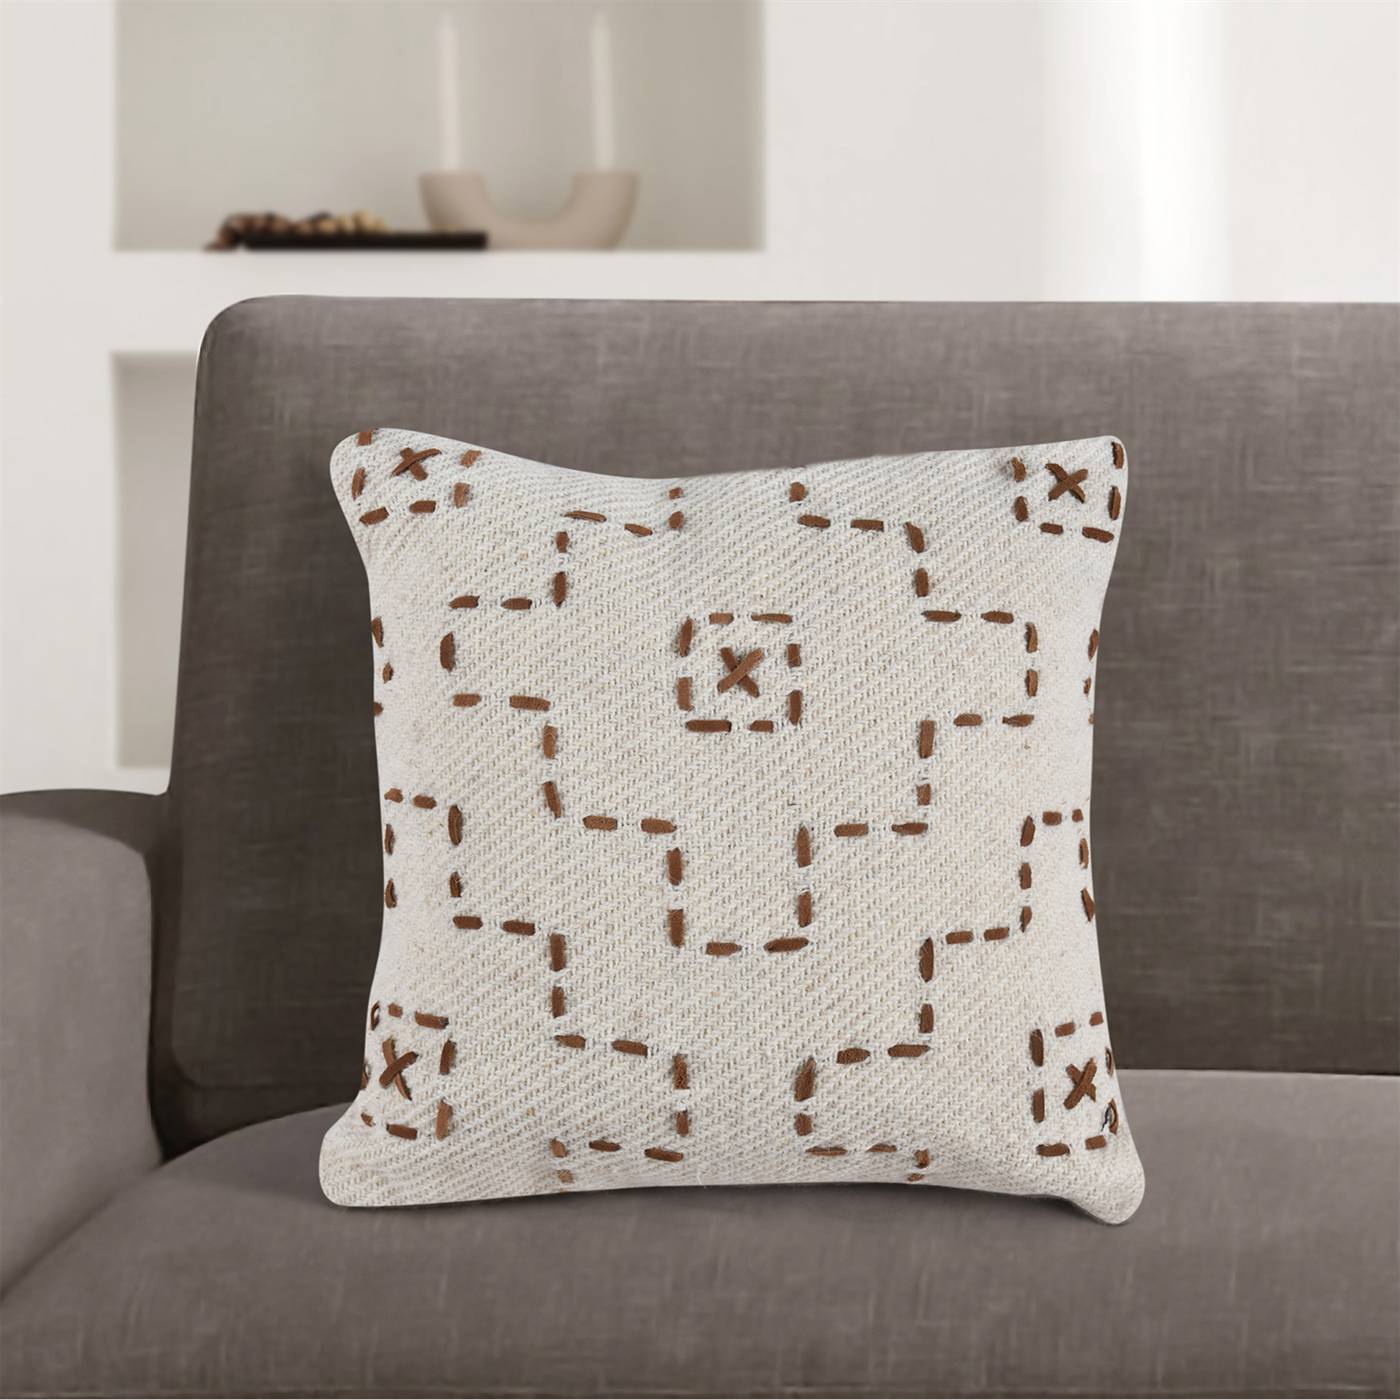 Leona Cushion, 45x45 cm, Natural White, Brown, Wool, Leather, Hand Made, Hm Stitching, Flat Weave